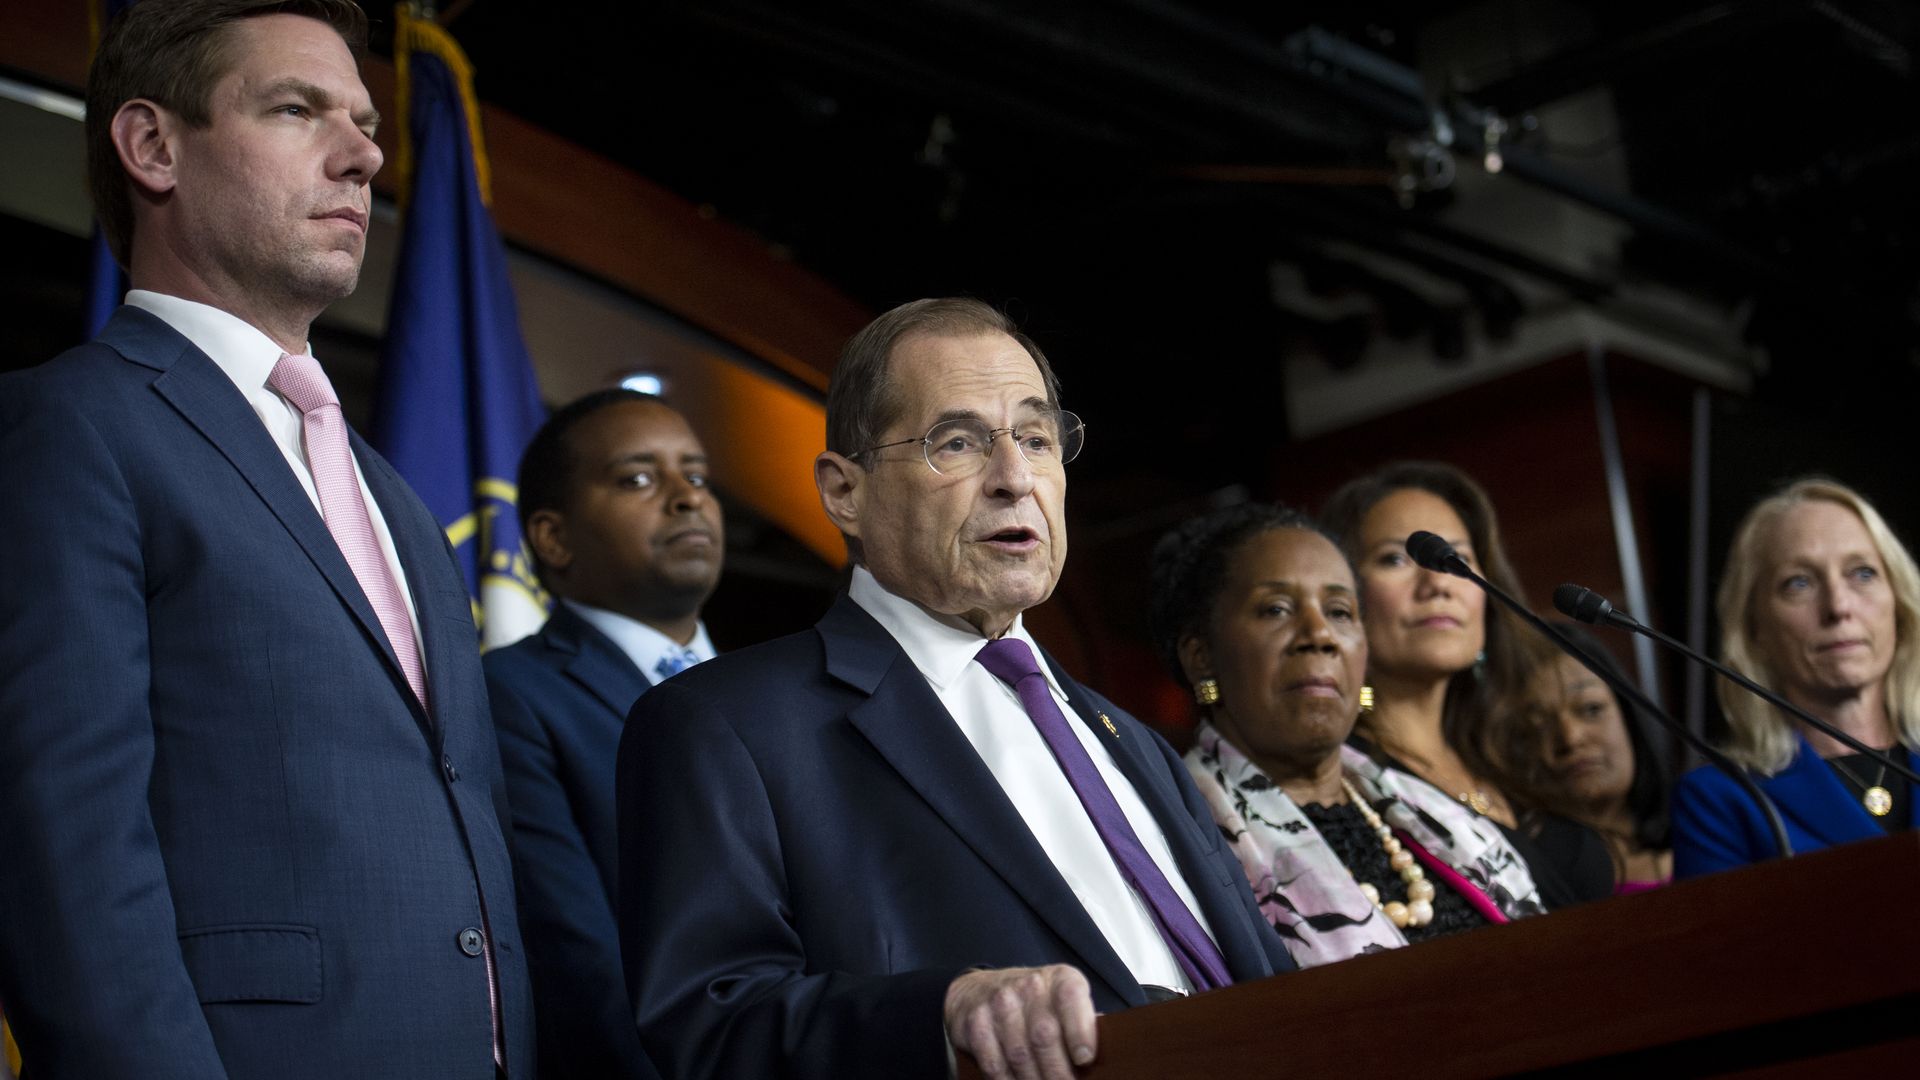 This image shows Nadler standing behind a podium and speaking at a press briefing.